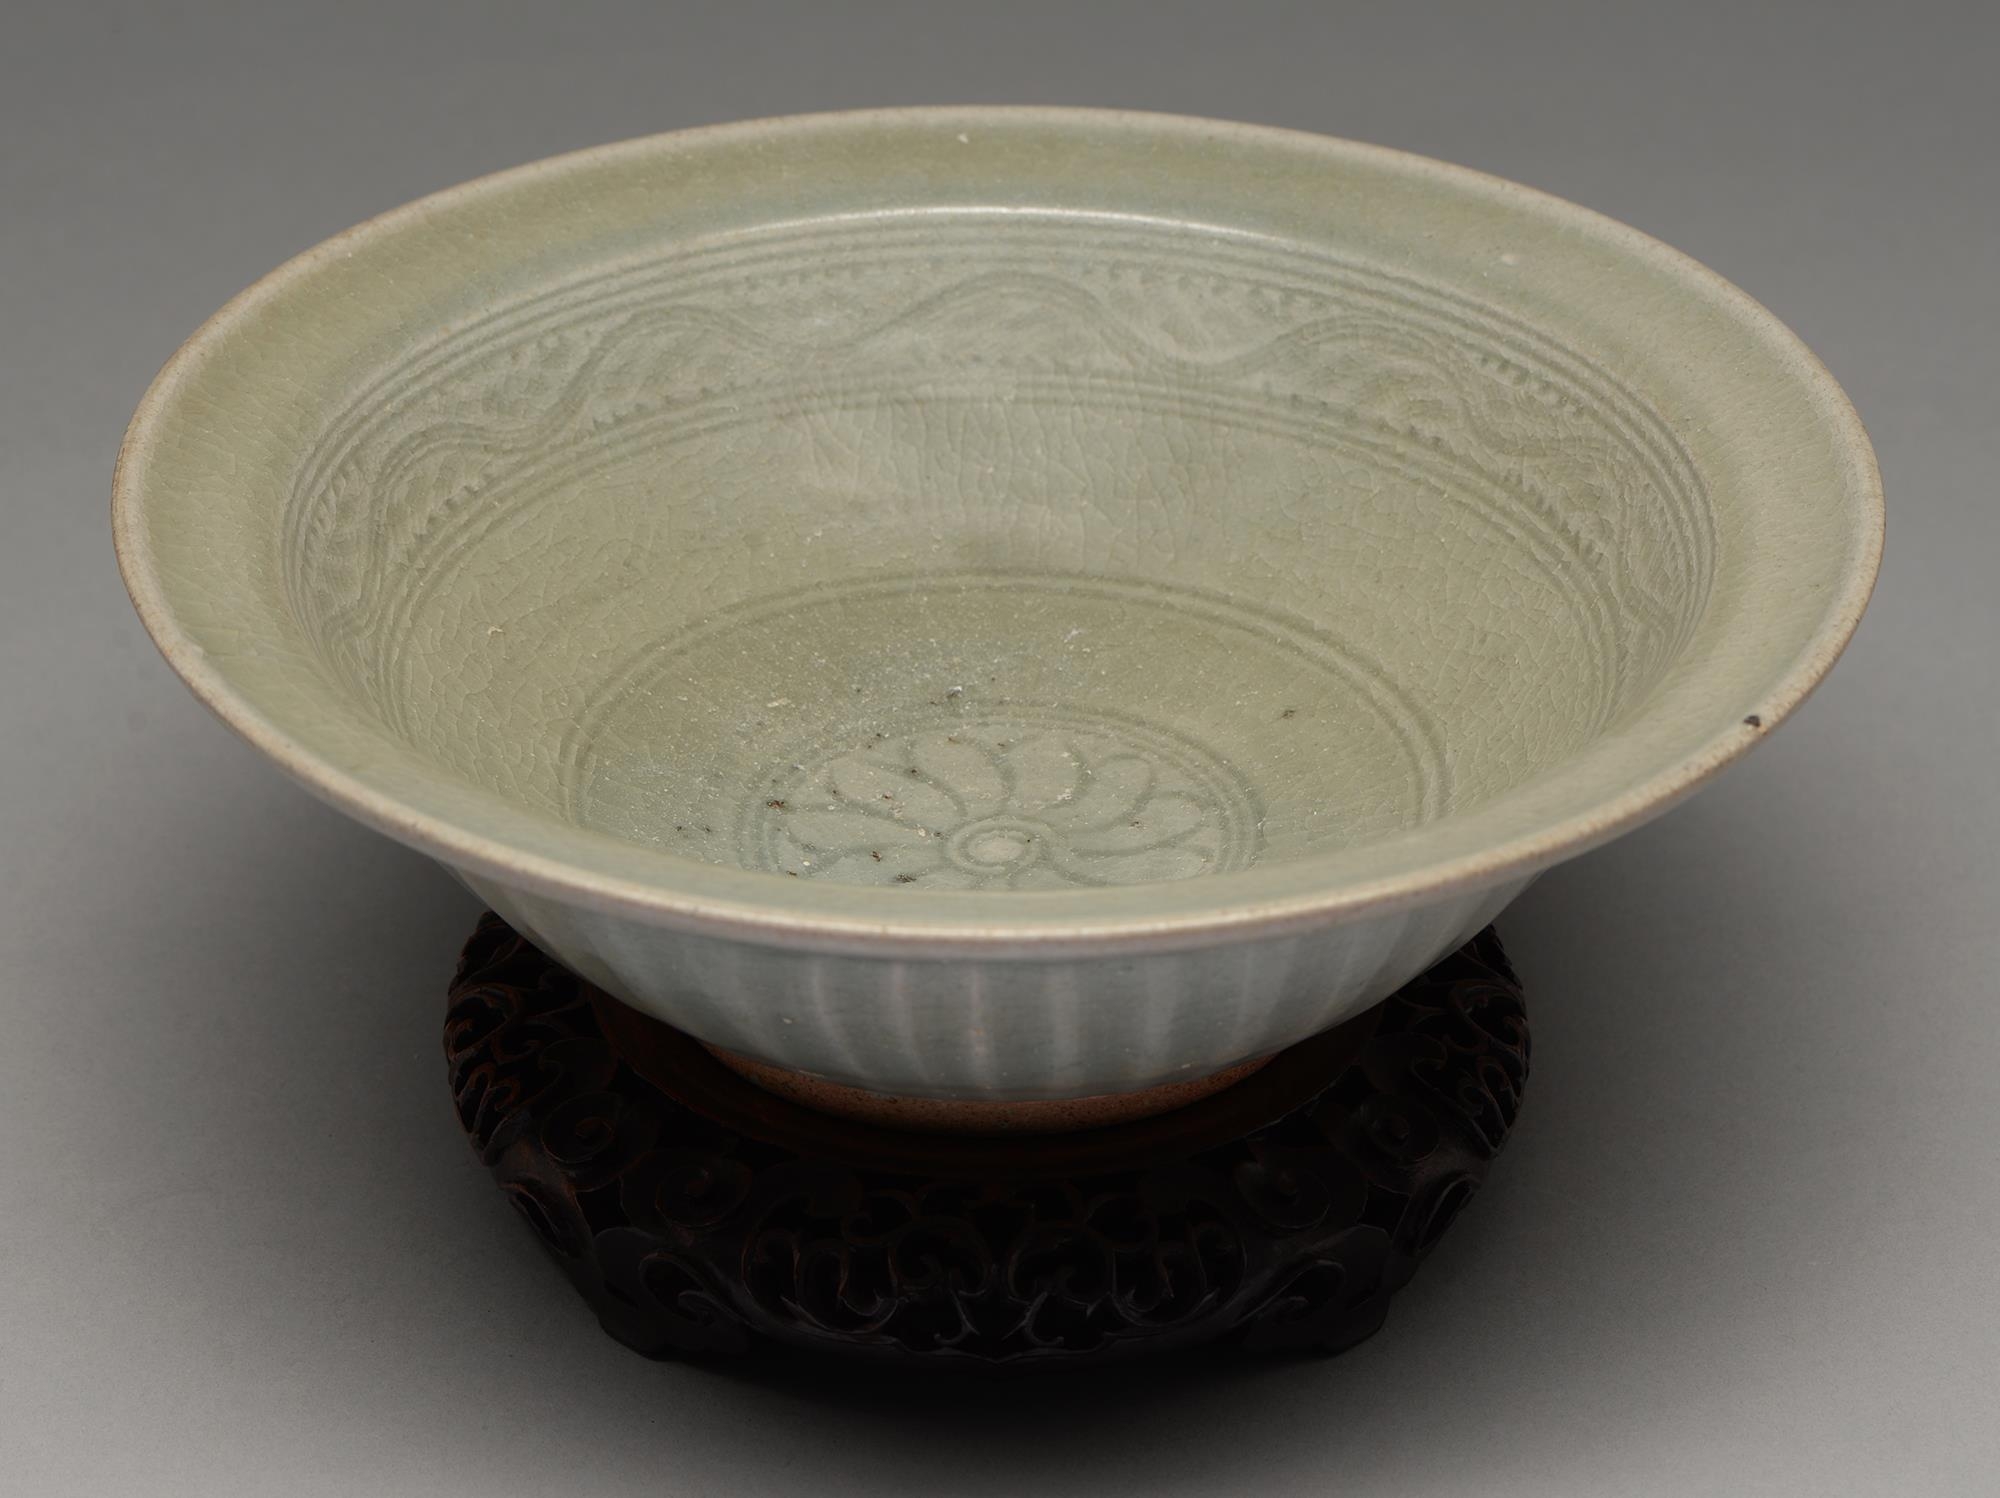 A Sukhothai / Sawankhalok celadon dish, 16th c, the fluted centre with out-splayed border and